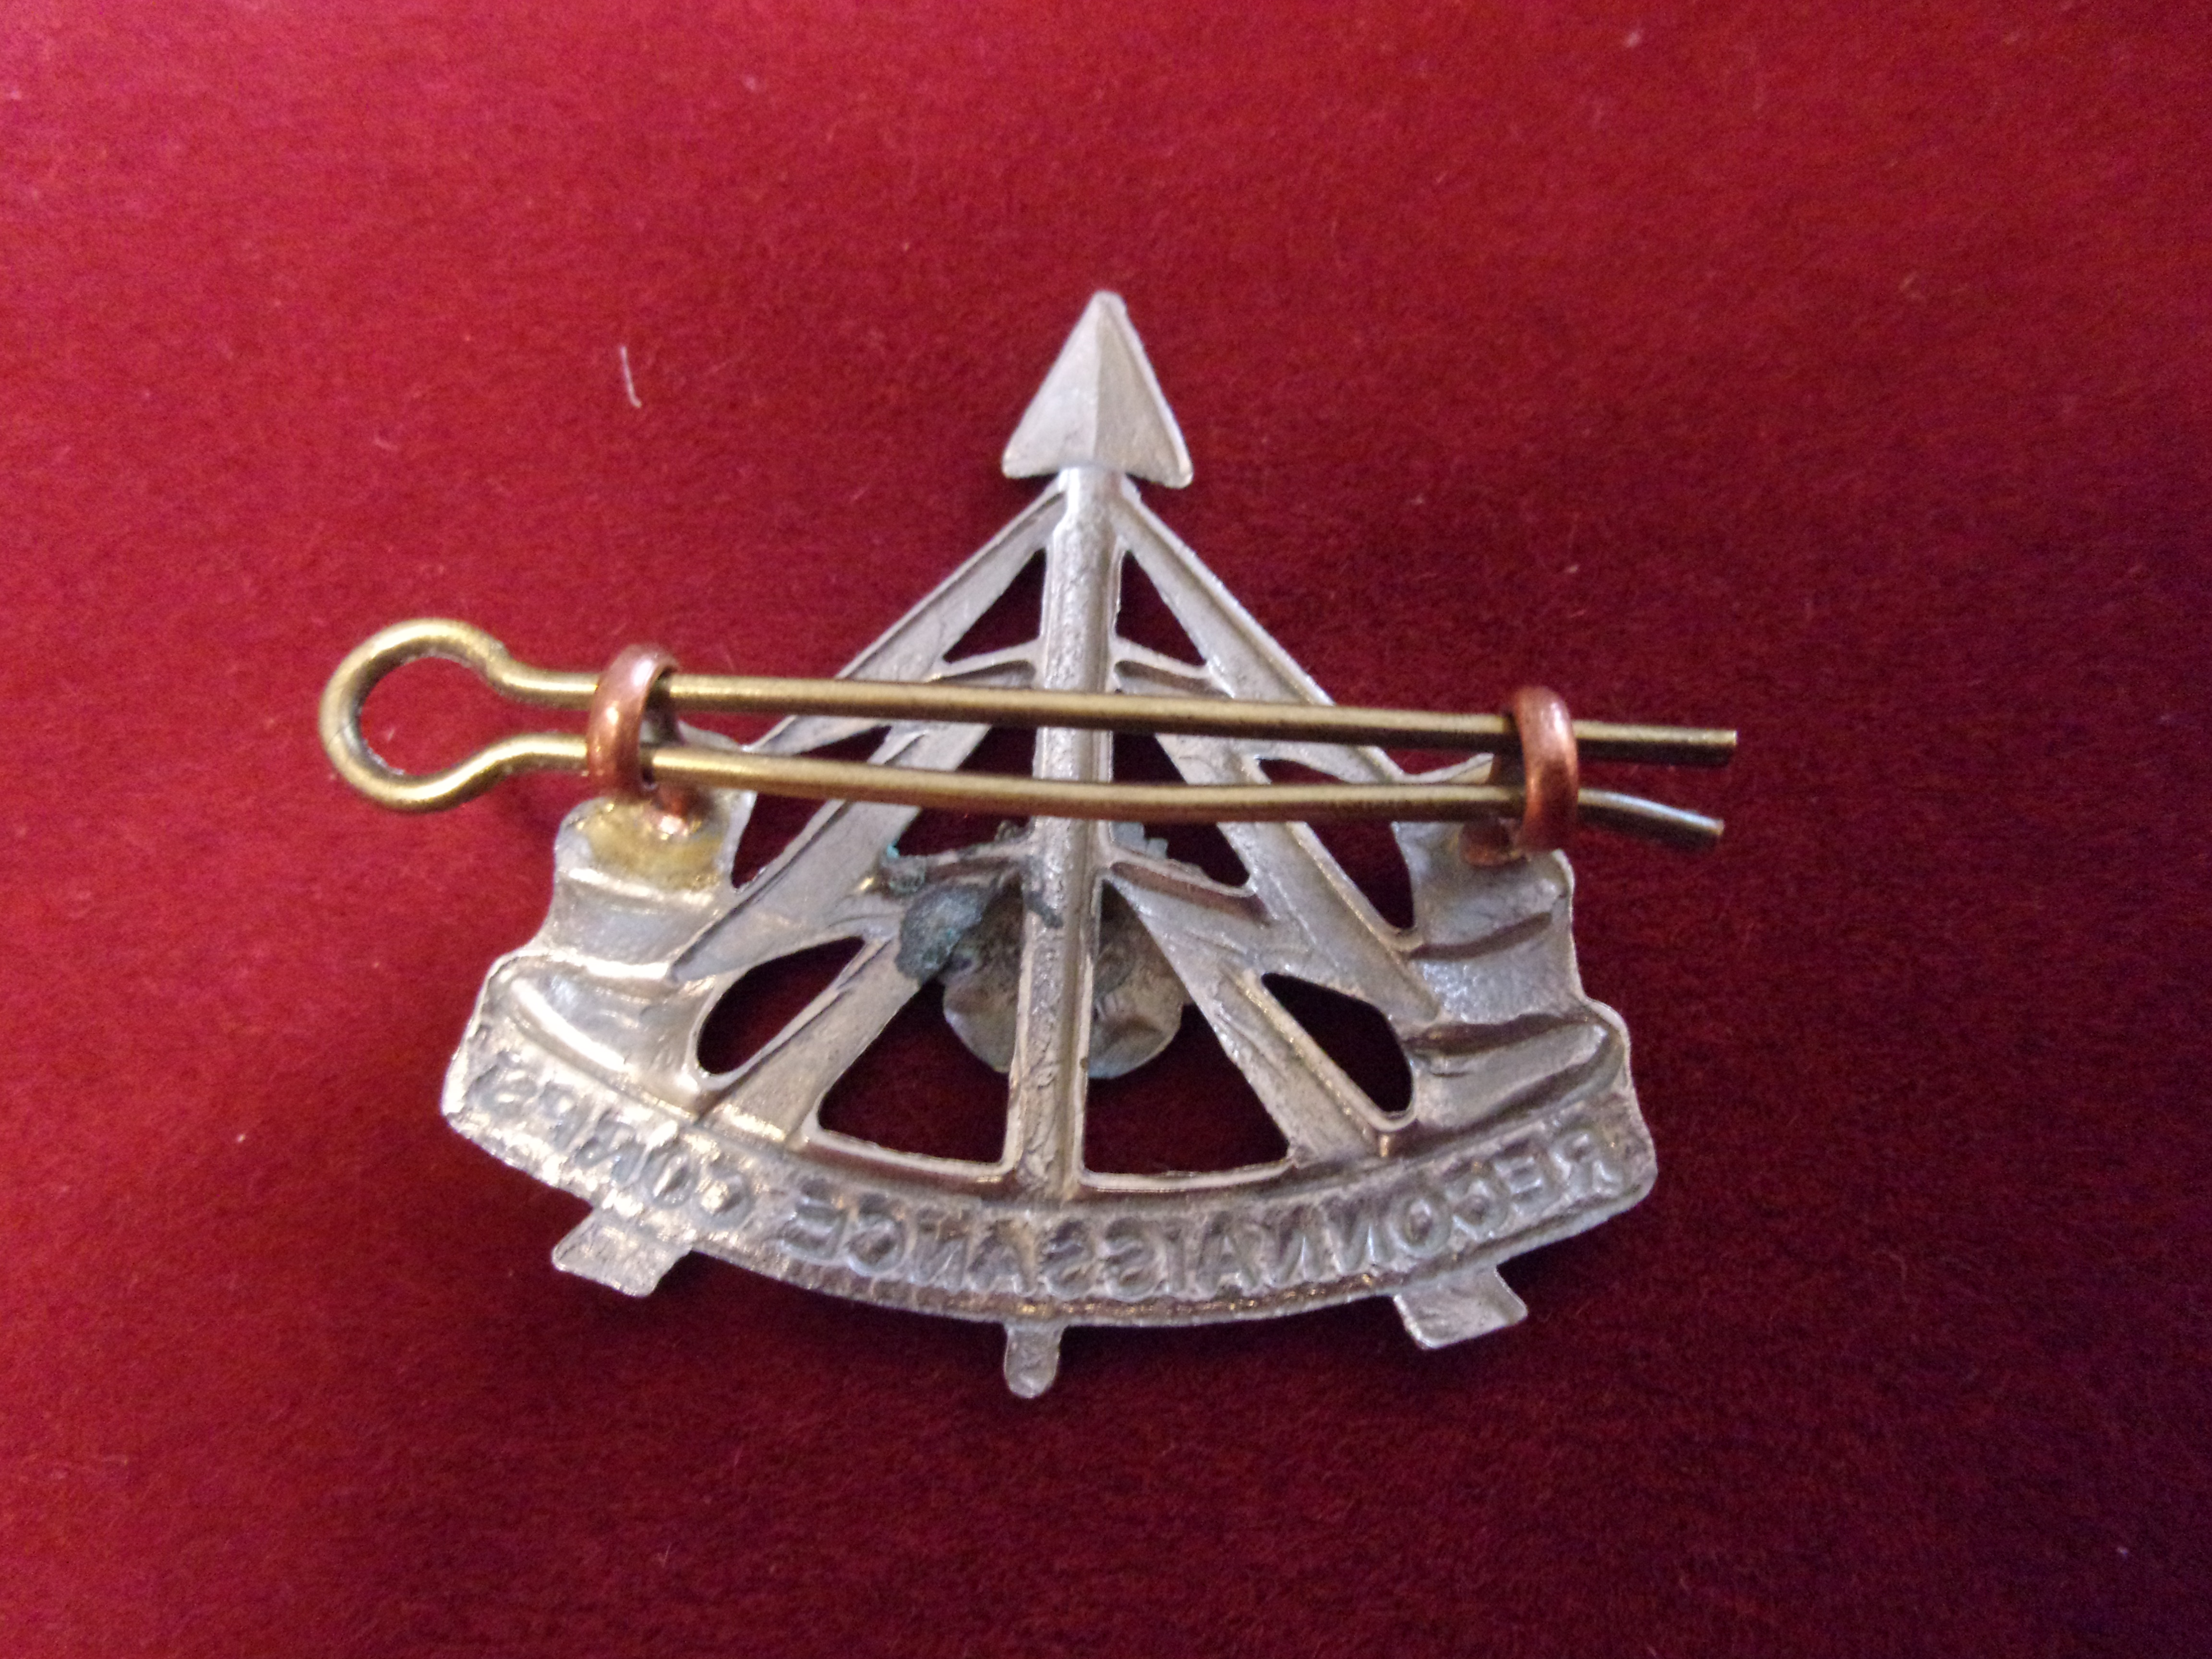 49th Reconnaissance Regiment WWII Officers Cap Badge (White-metal), two lugs. Issued between 1942- - Image 2 of 2